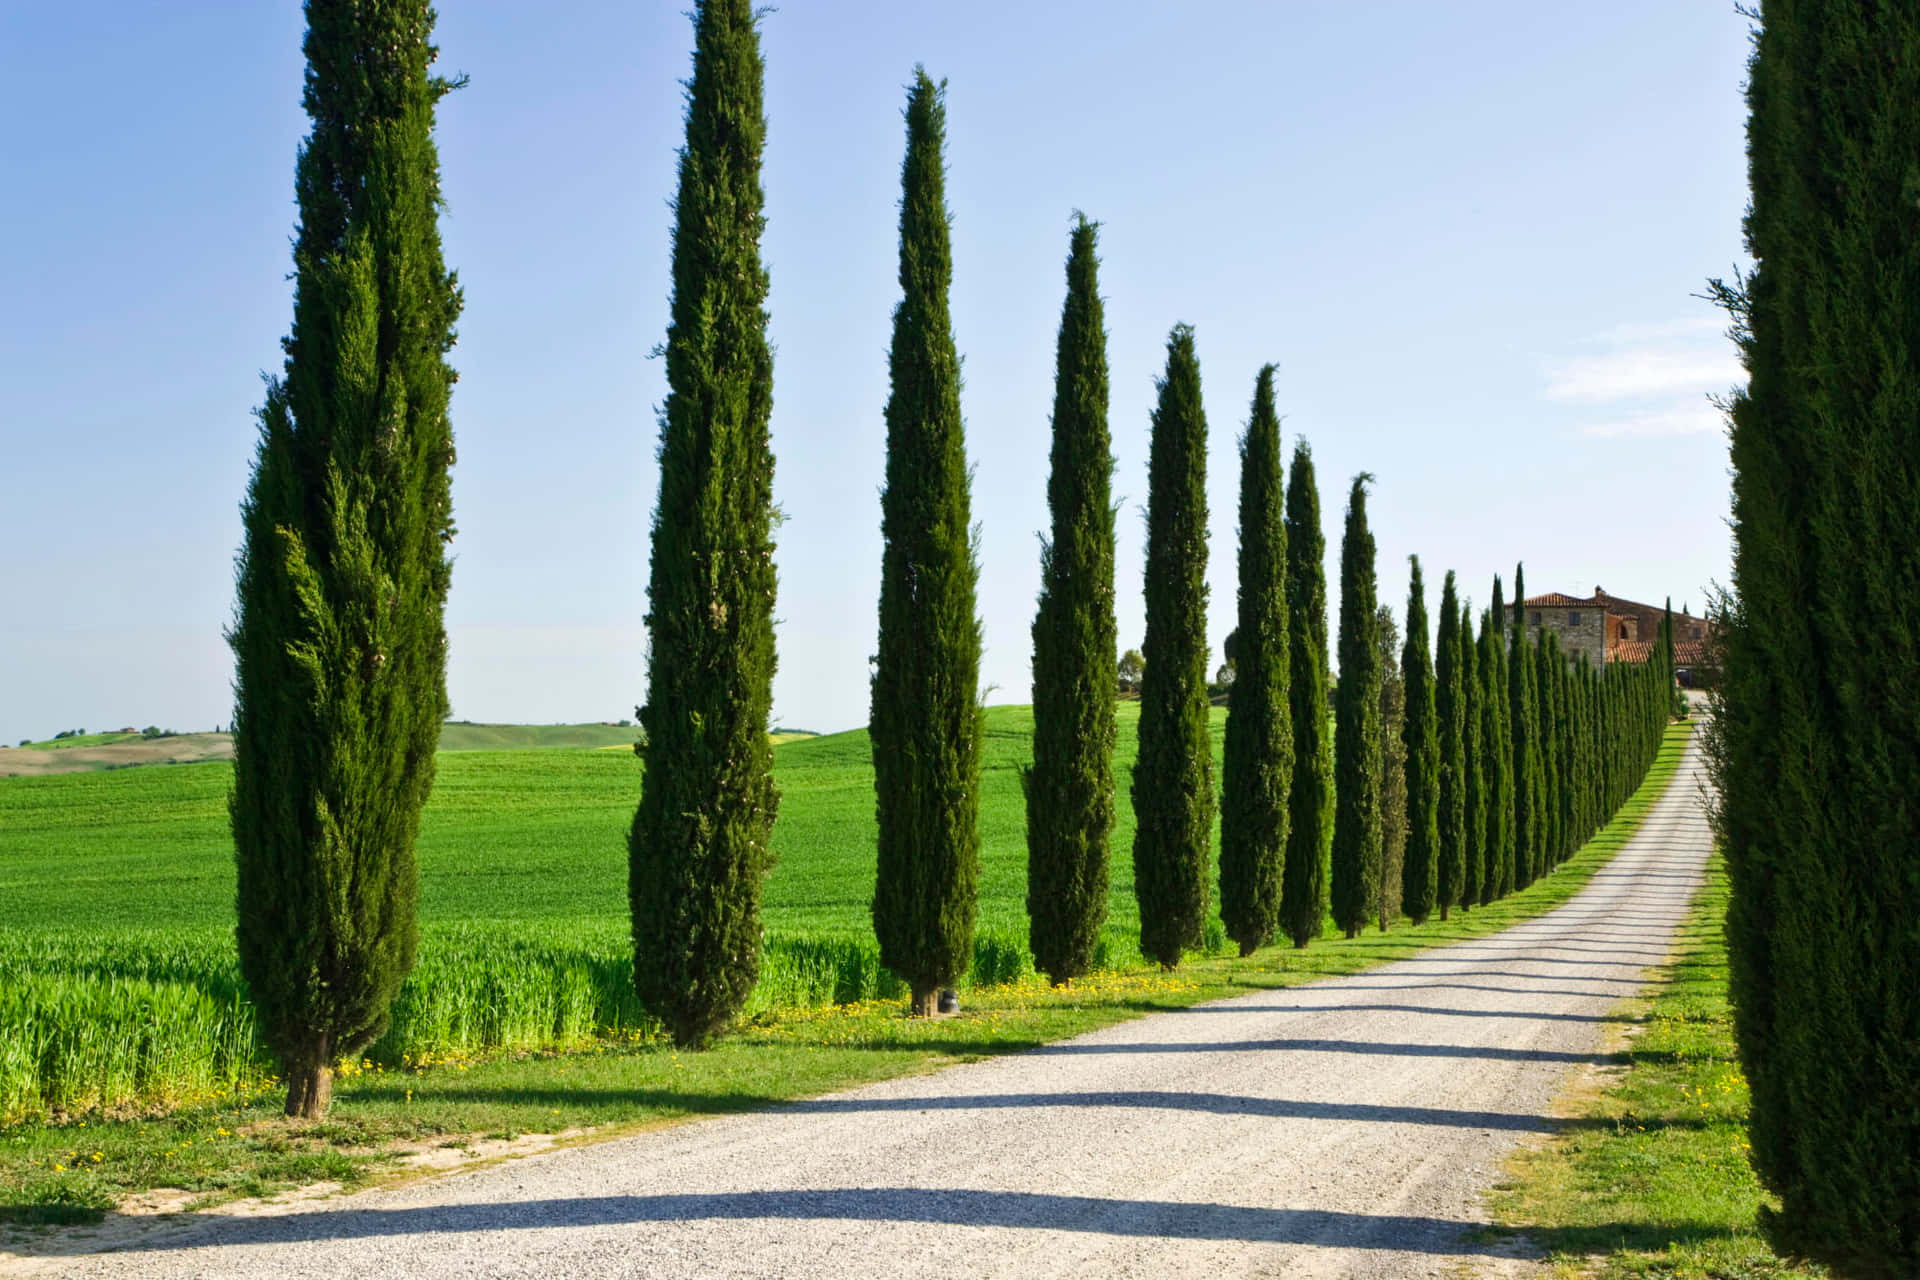 A Road Lined With Cypress Trees